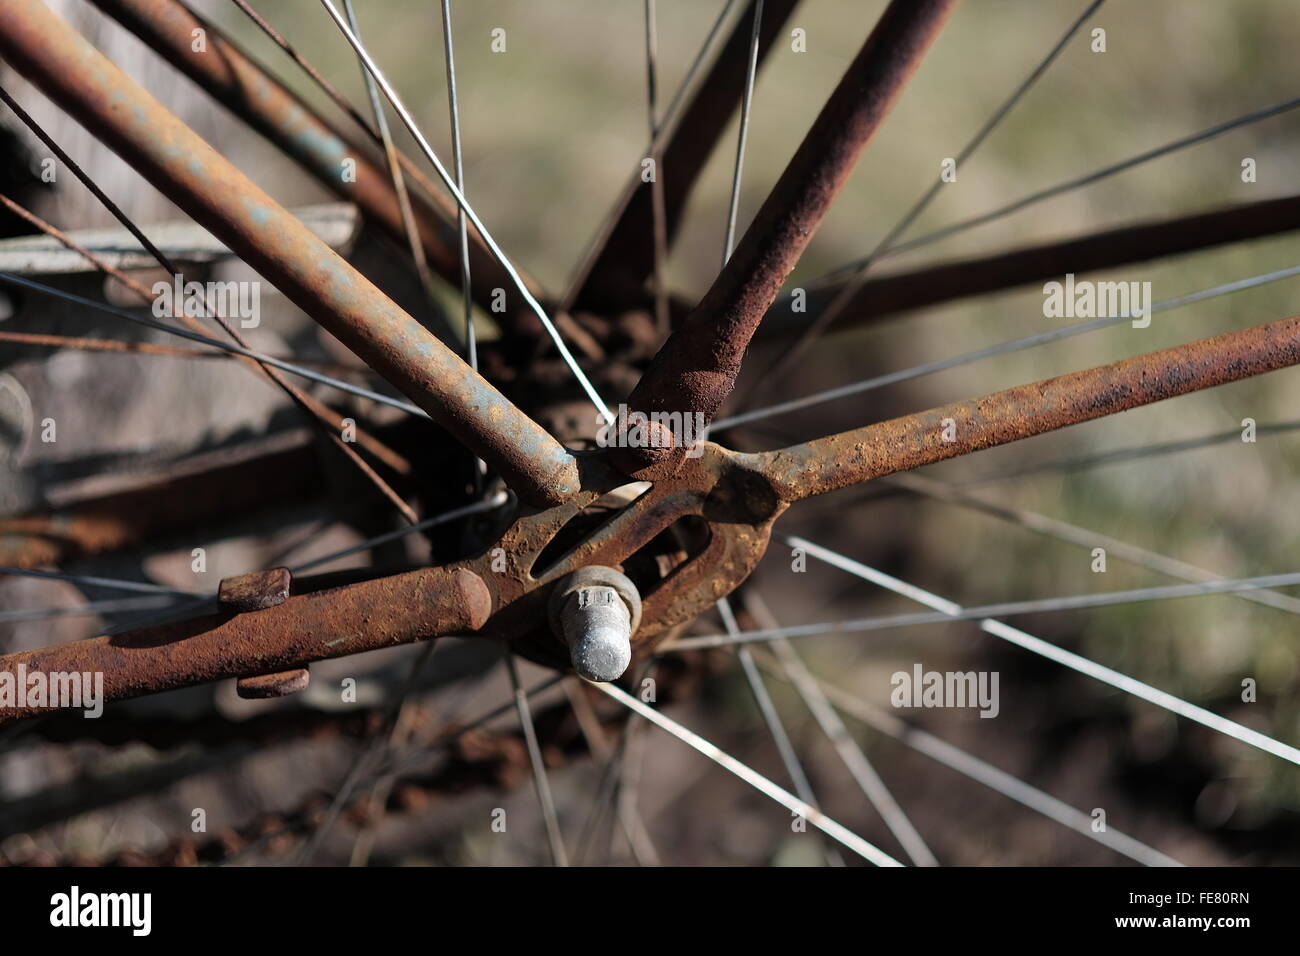 Close-Up Of Rusty Bicycle Wheel Stock Photo